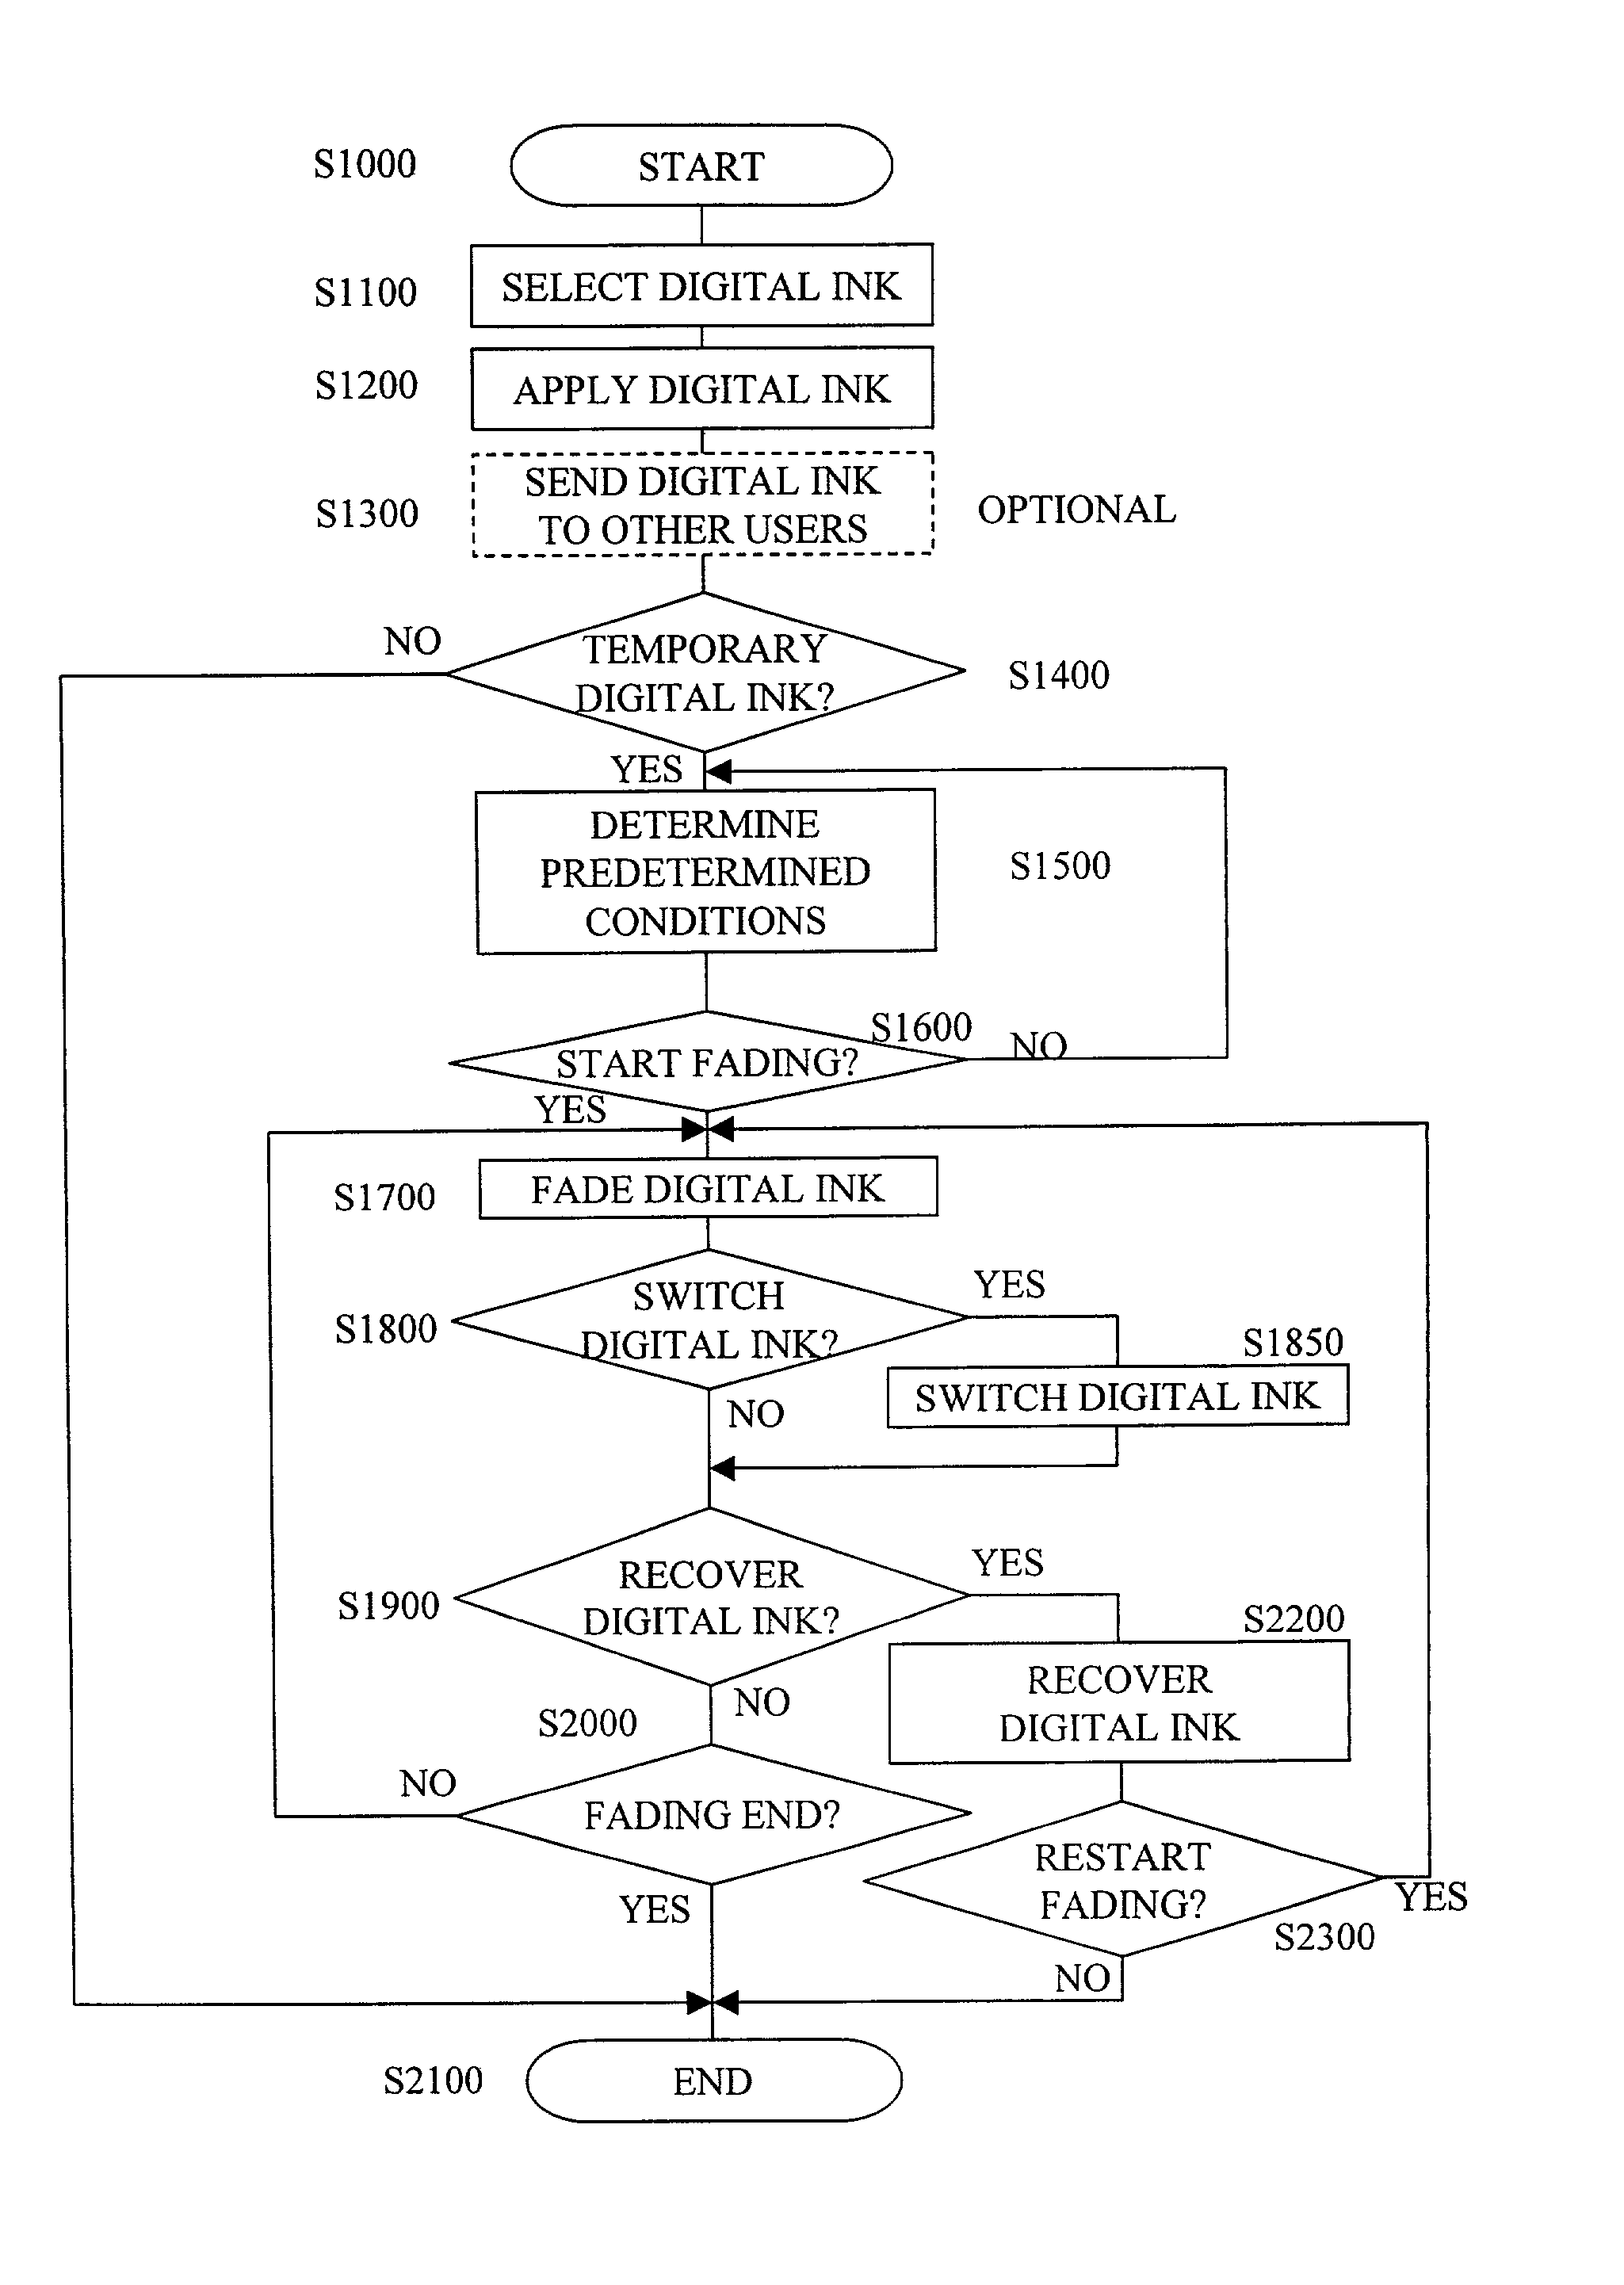 Systems and methods for generating and controlling temporary digital ink